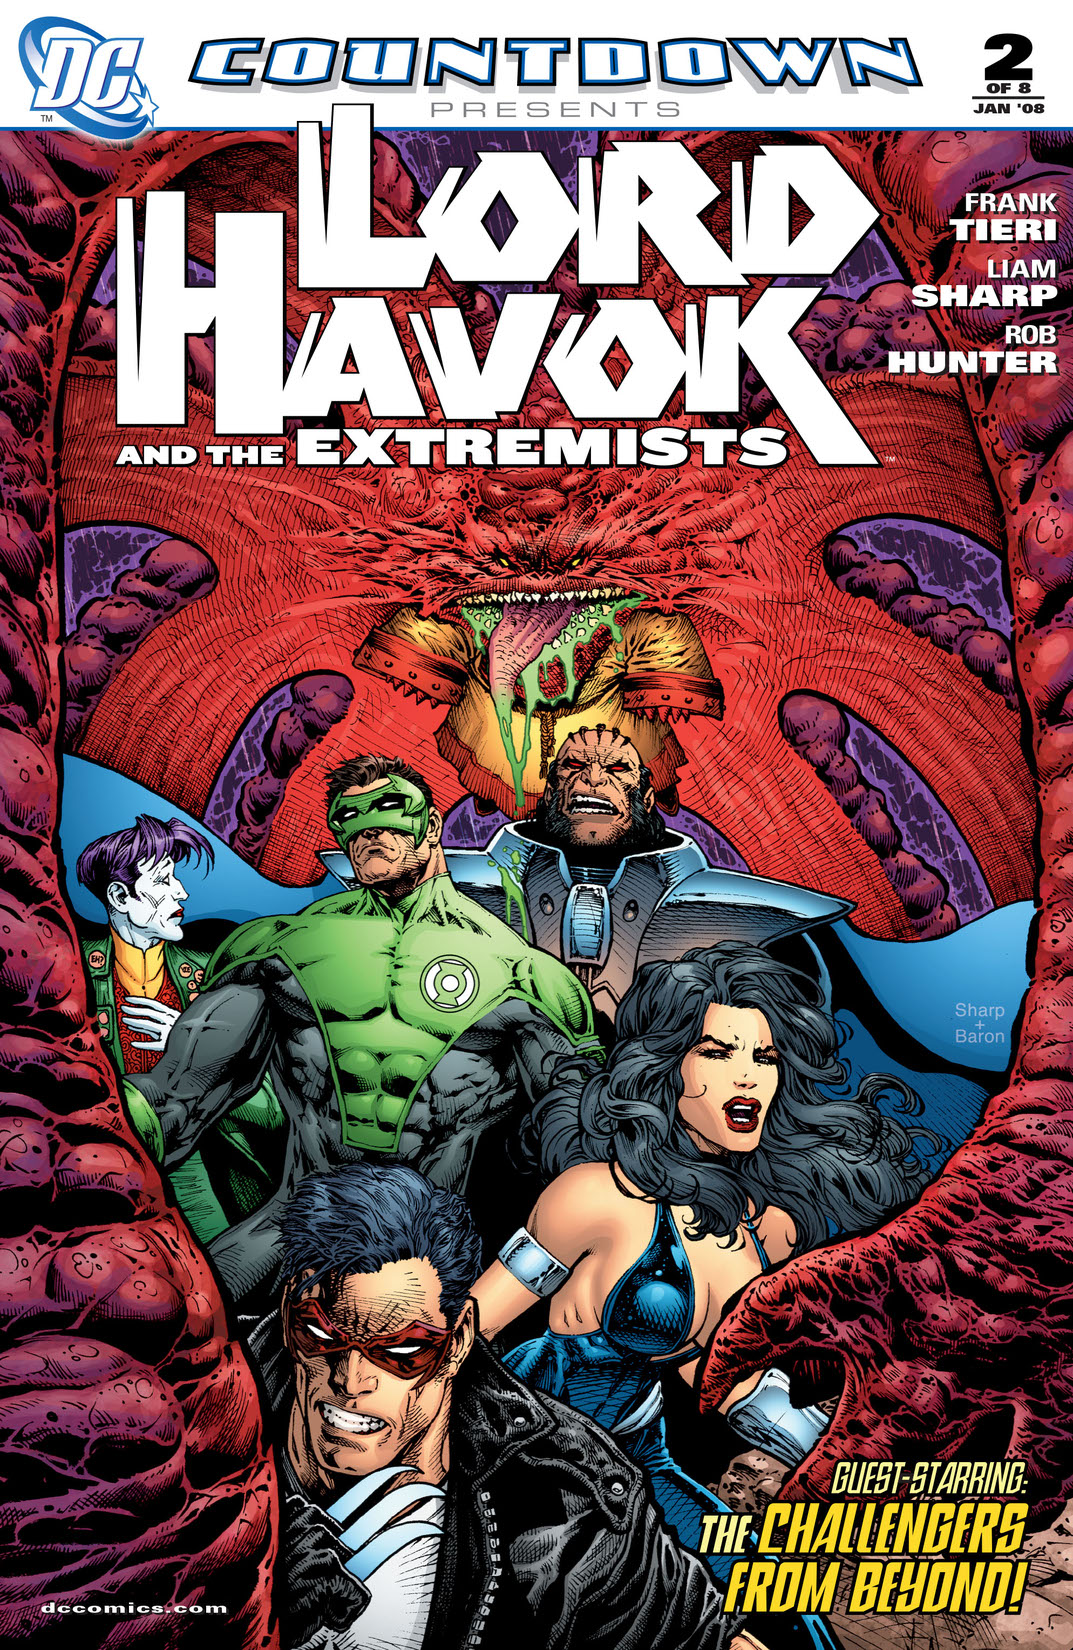 Countdown Presents: Lord Havok & the Extremists #2 preview images